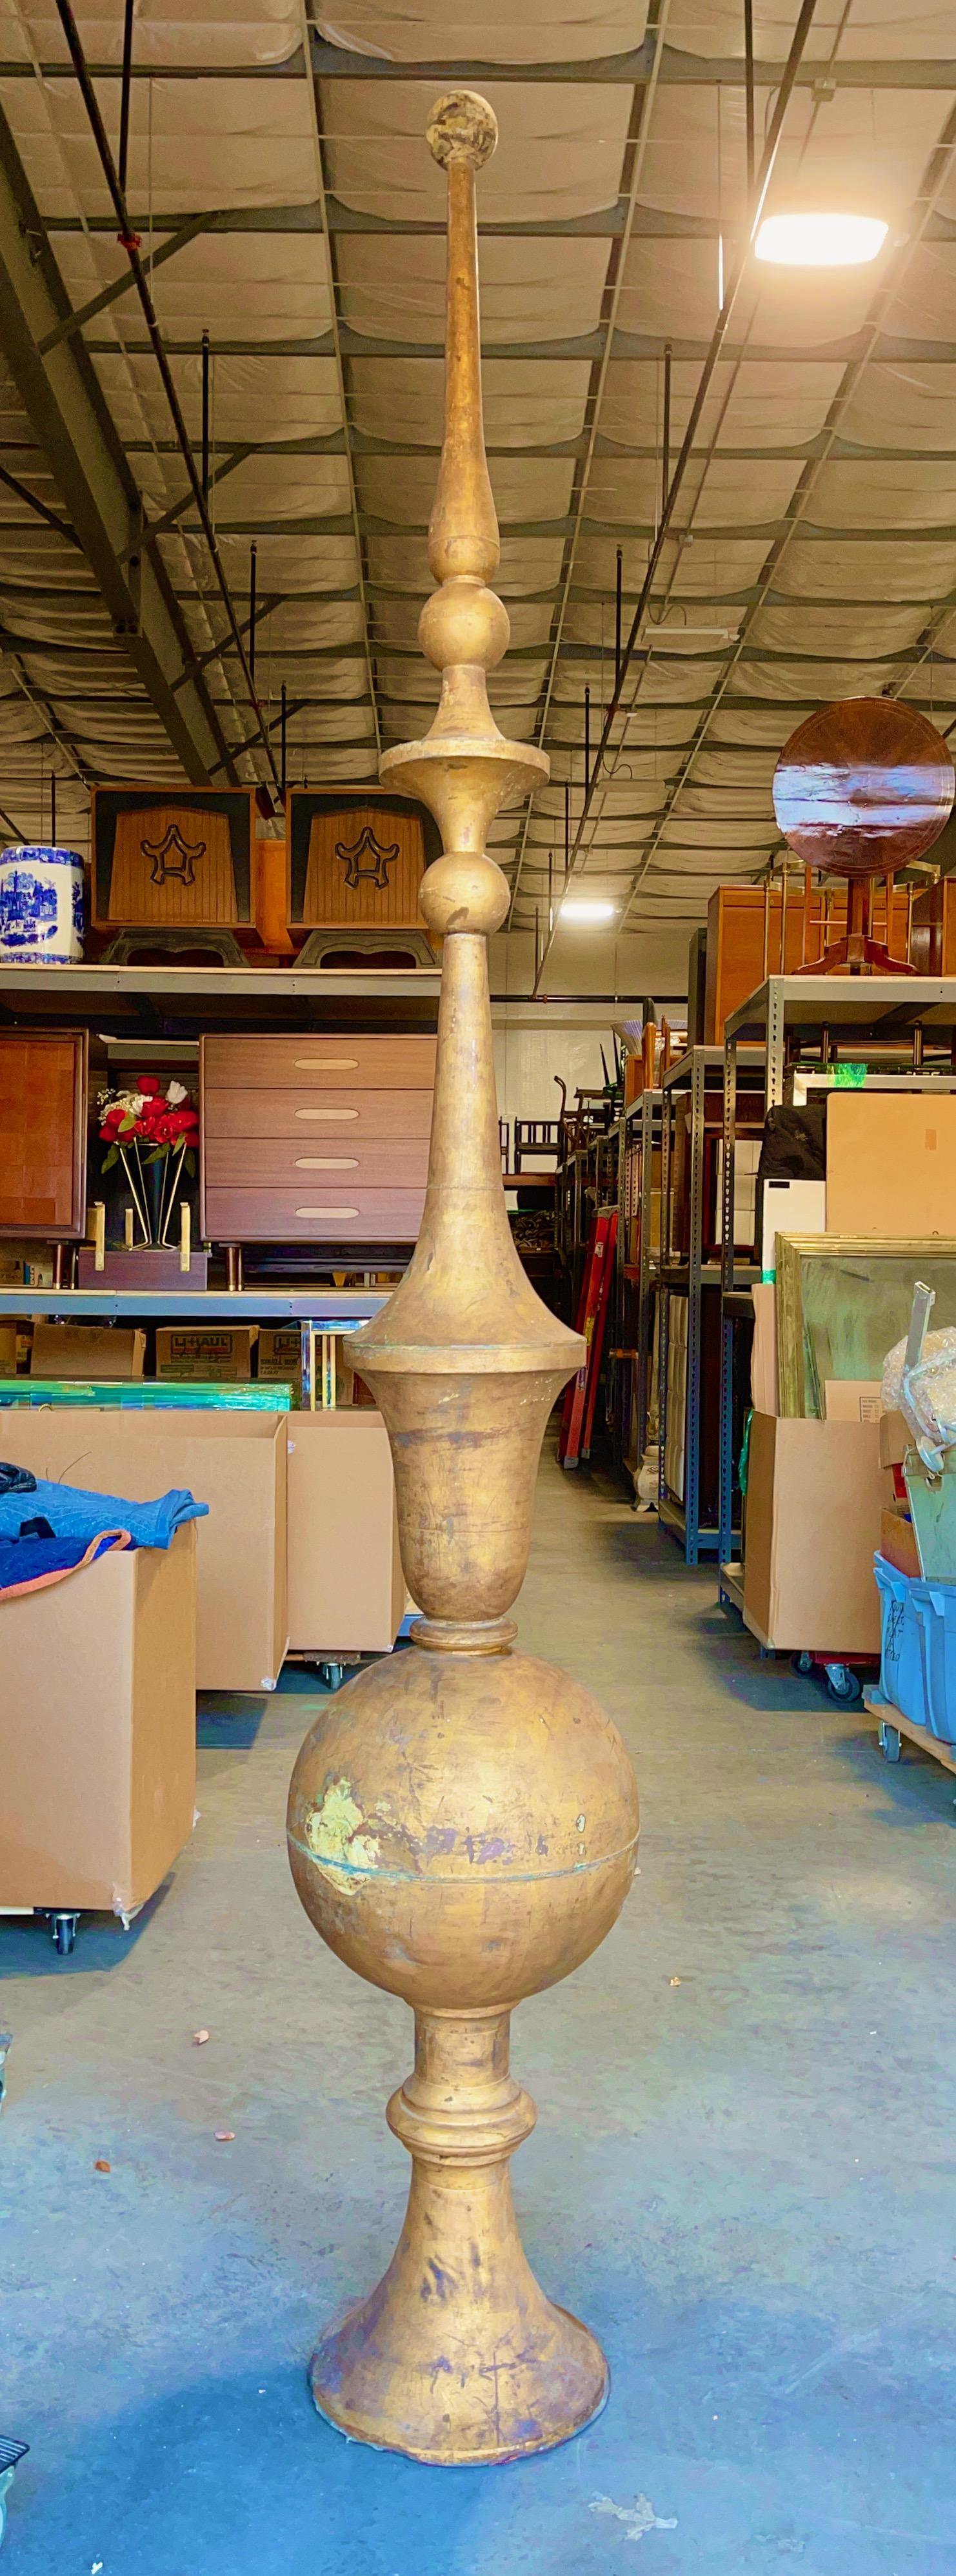 Extraordinary architectural roof finial spire over 9 feet high constructed of hand beaten copper then finished in gold leaf.
Looking for a statement piece? You've found it!
Weighs under 75 pounds.  Stands steady on its own. In two pieces: the top